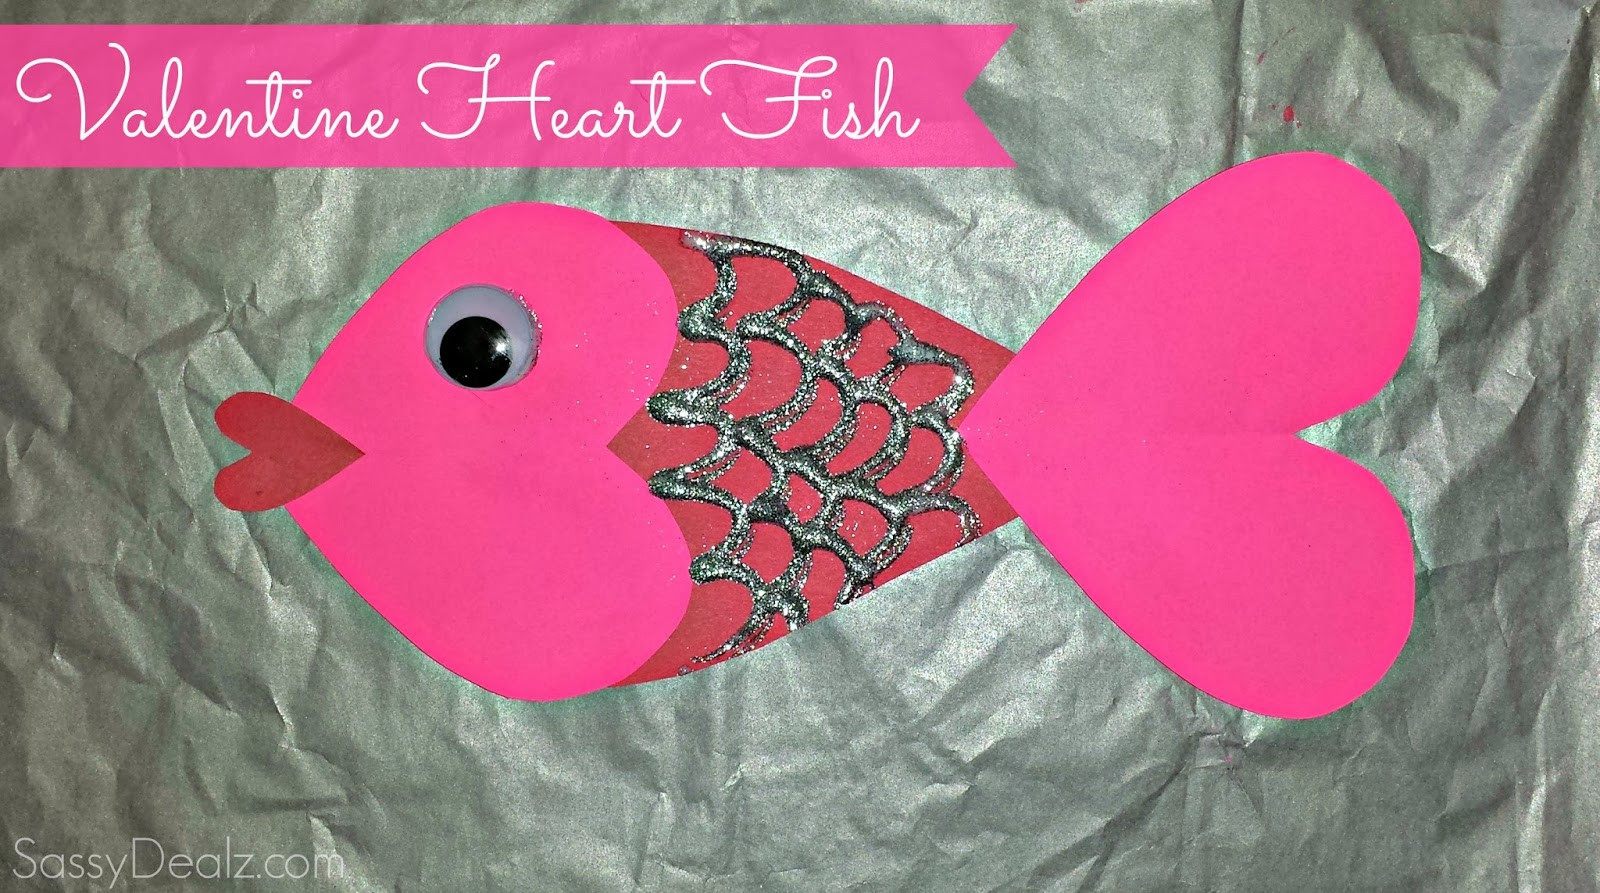 Valentines Art And Craft For Kids
 Simple and Fun Valentine s Day Crafts for Kids